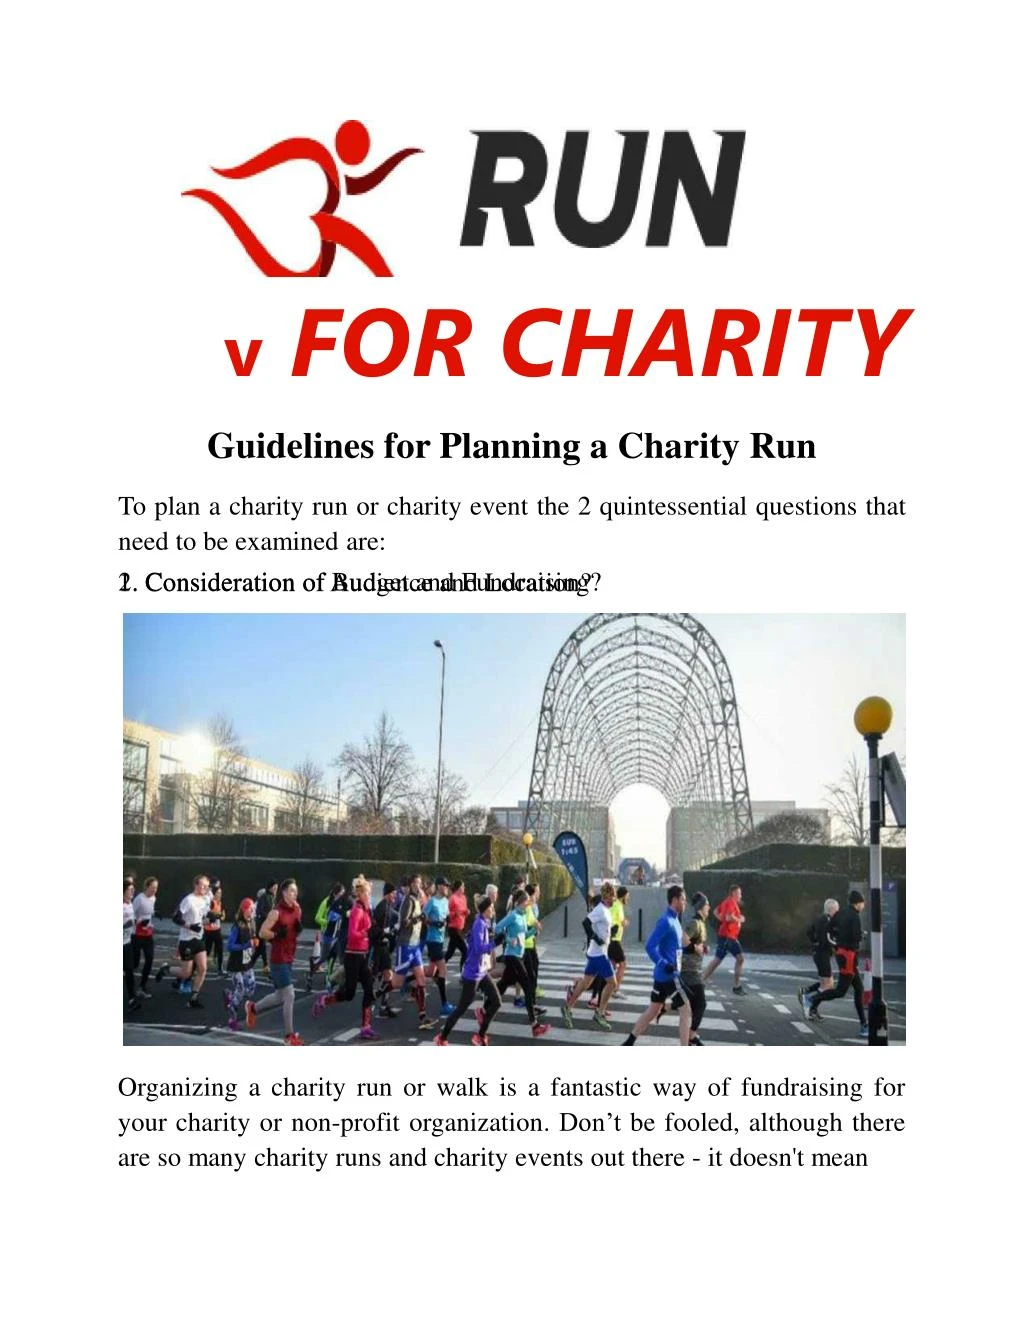 v for charity guidelines for planning a charity